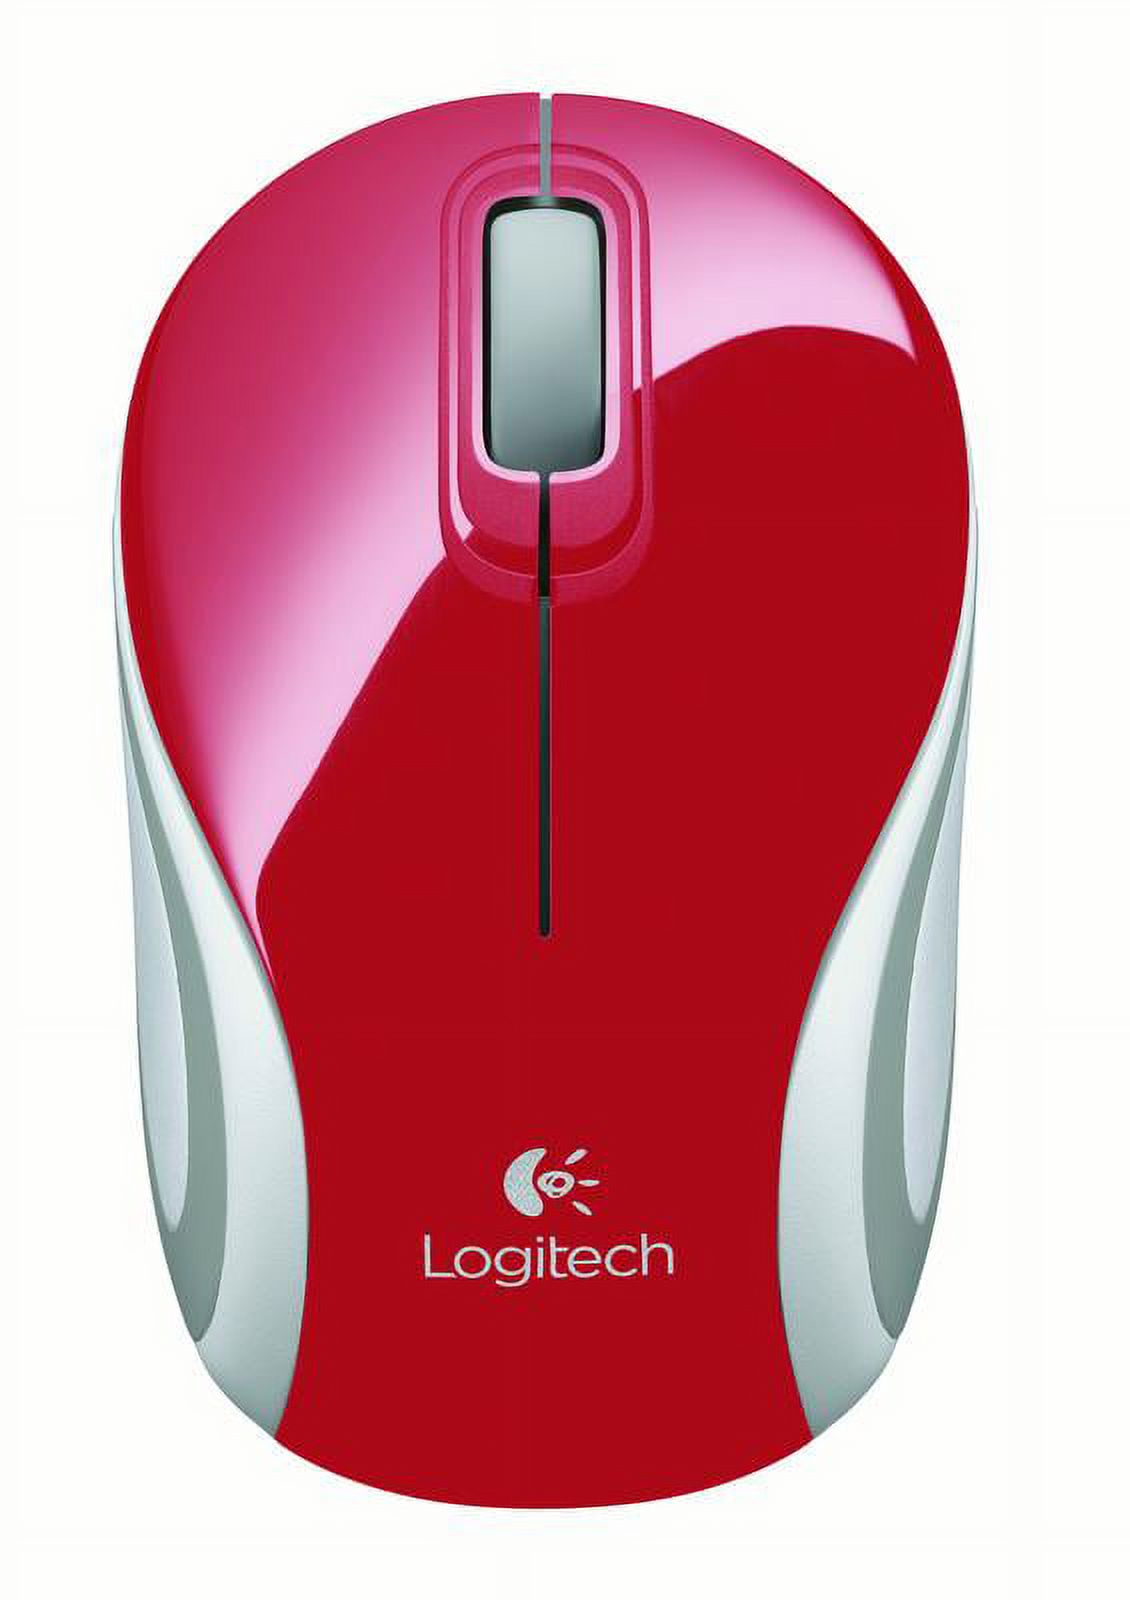 Logitech M187 Wireless Mini Mouse - Red - image 1 of 4